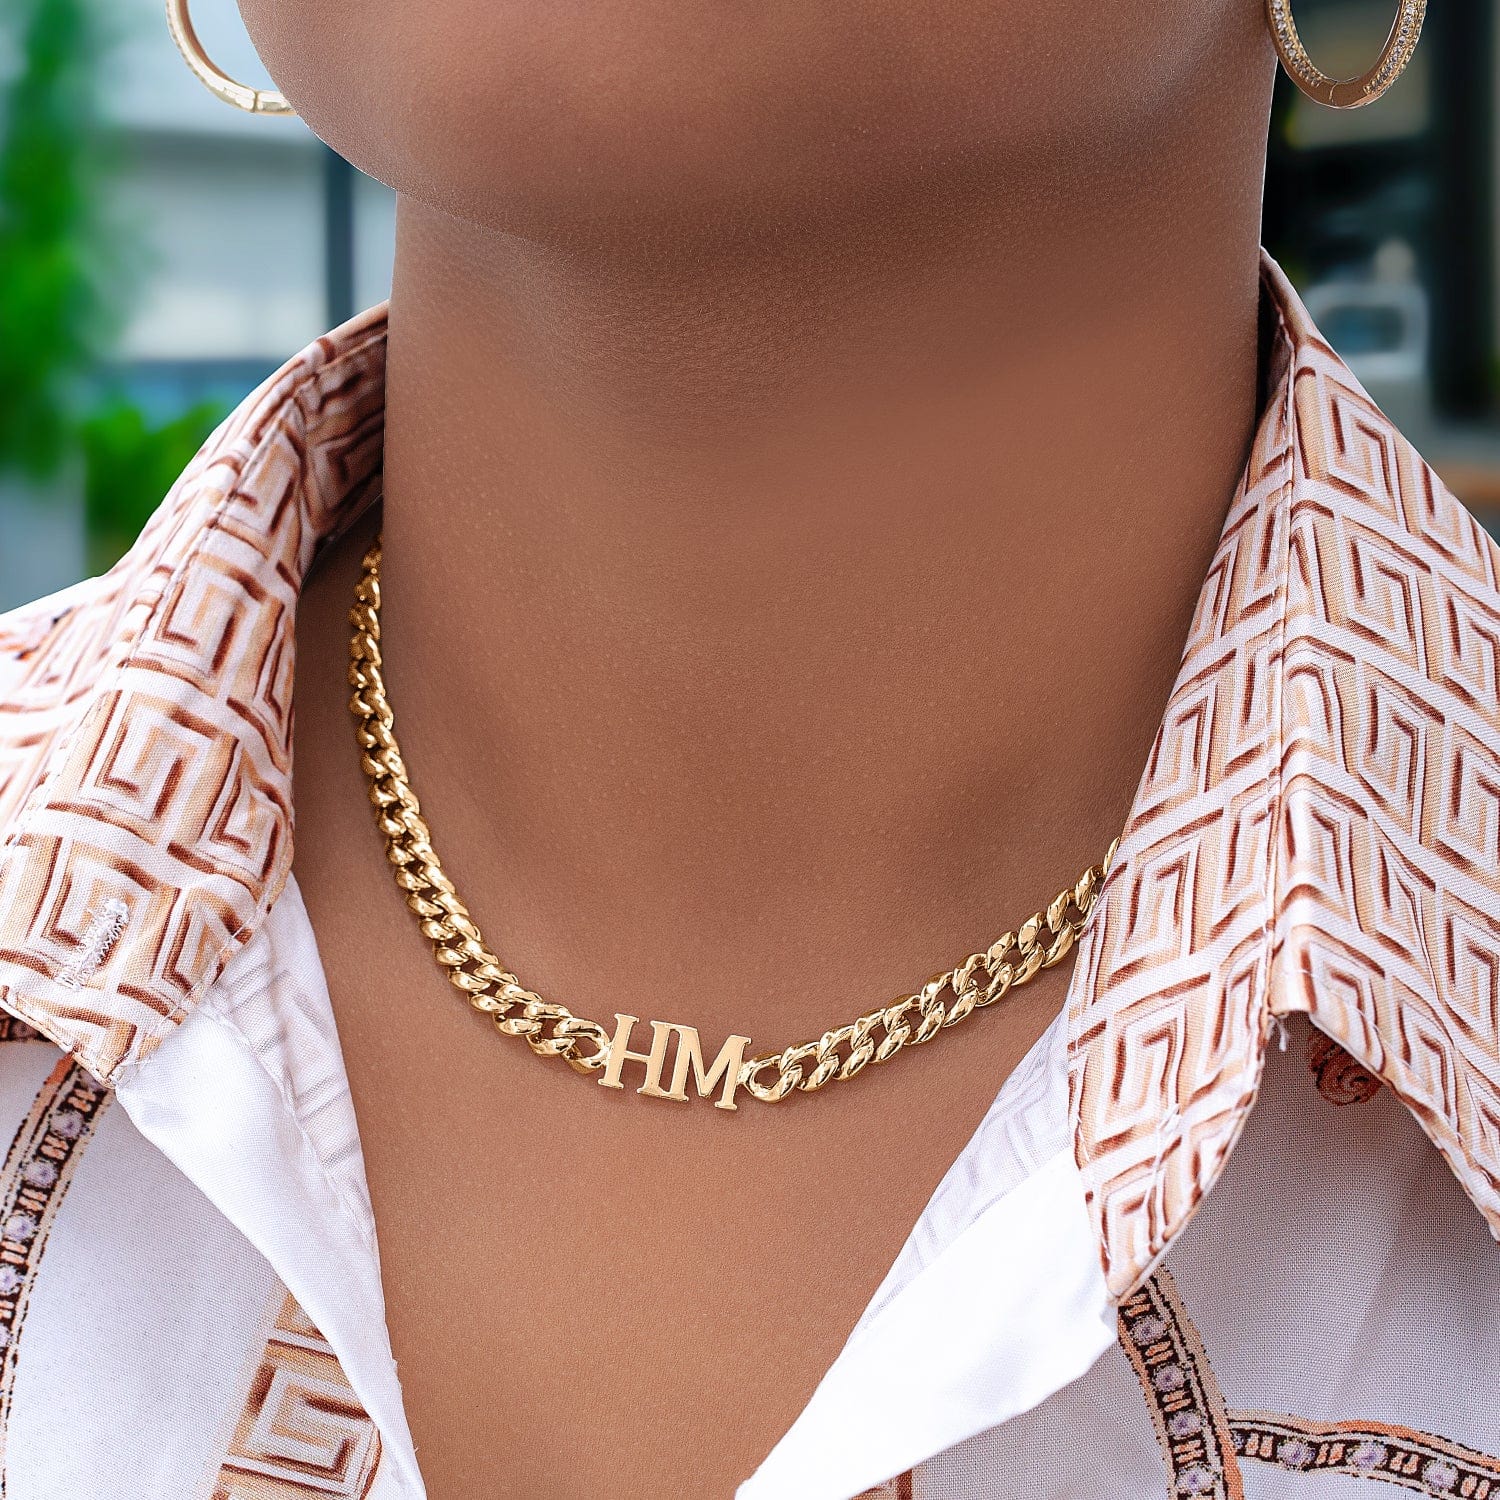 14K Solid Gold / Cuban Chain Copy of Two Intial Choker Necklace with Cuban Chain